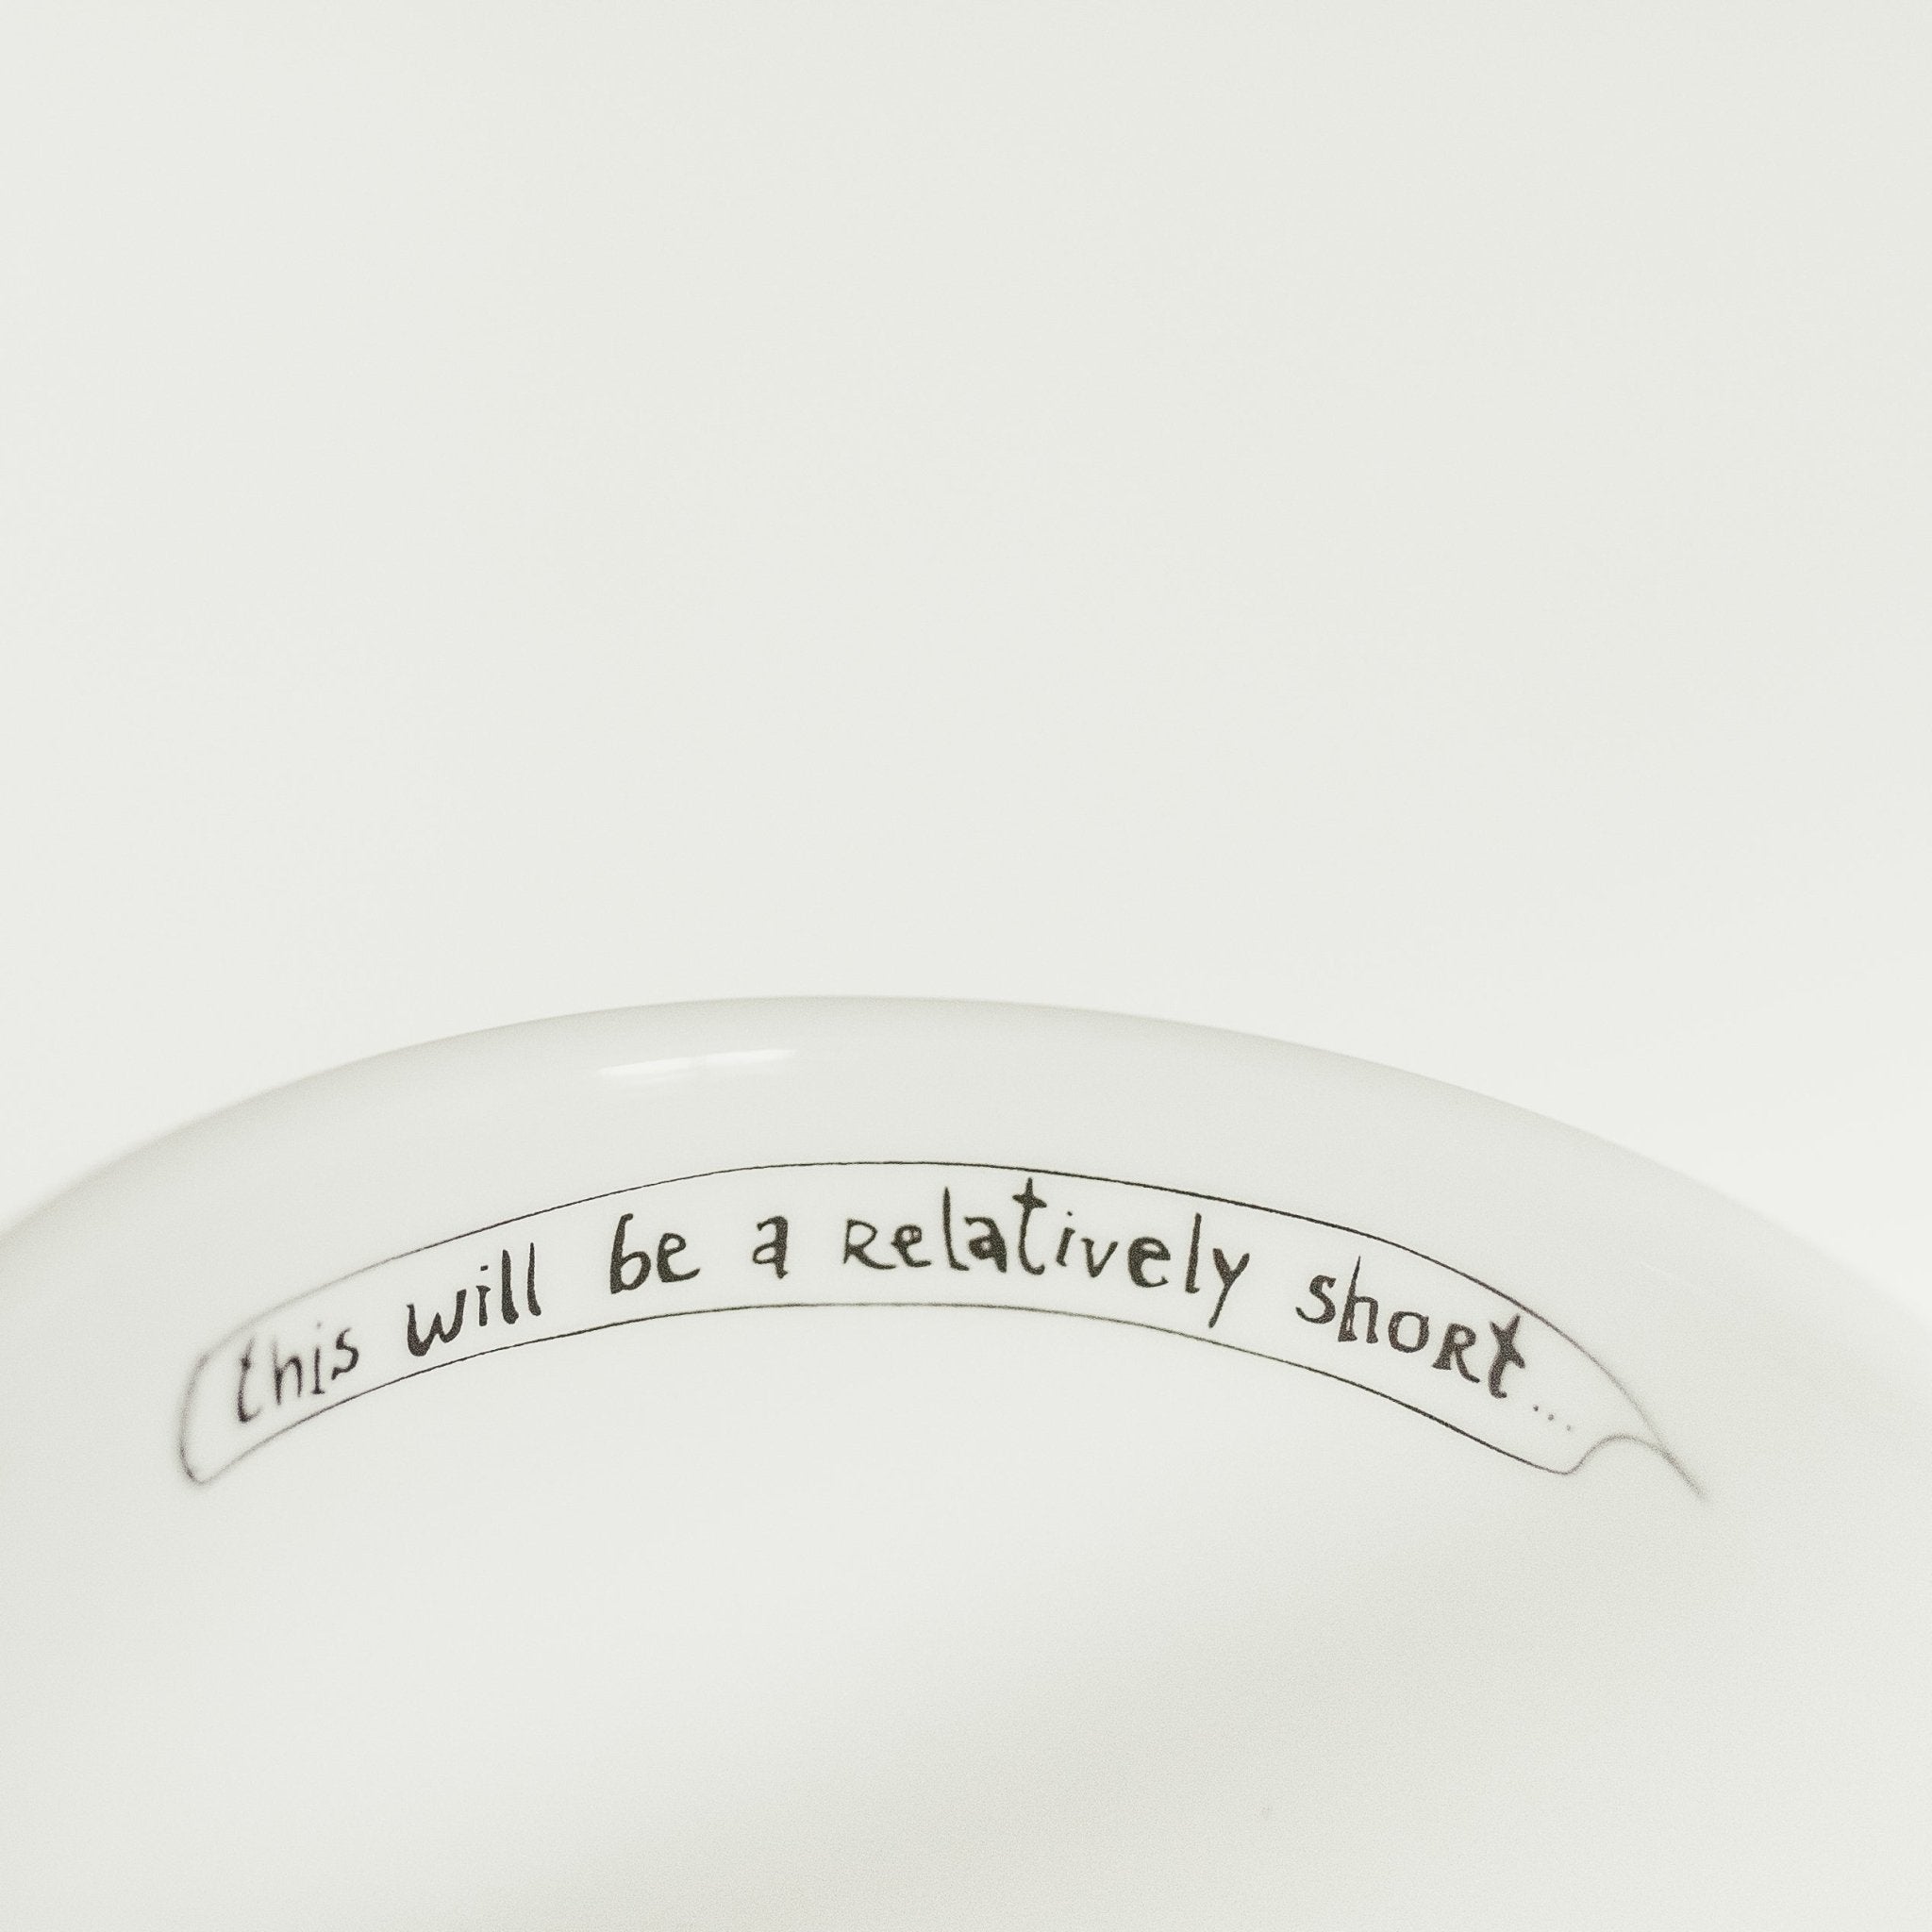 Porcelain cup inspired by Albert Einstein text inside of the cup